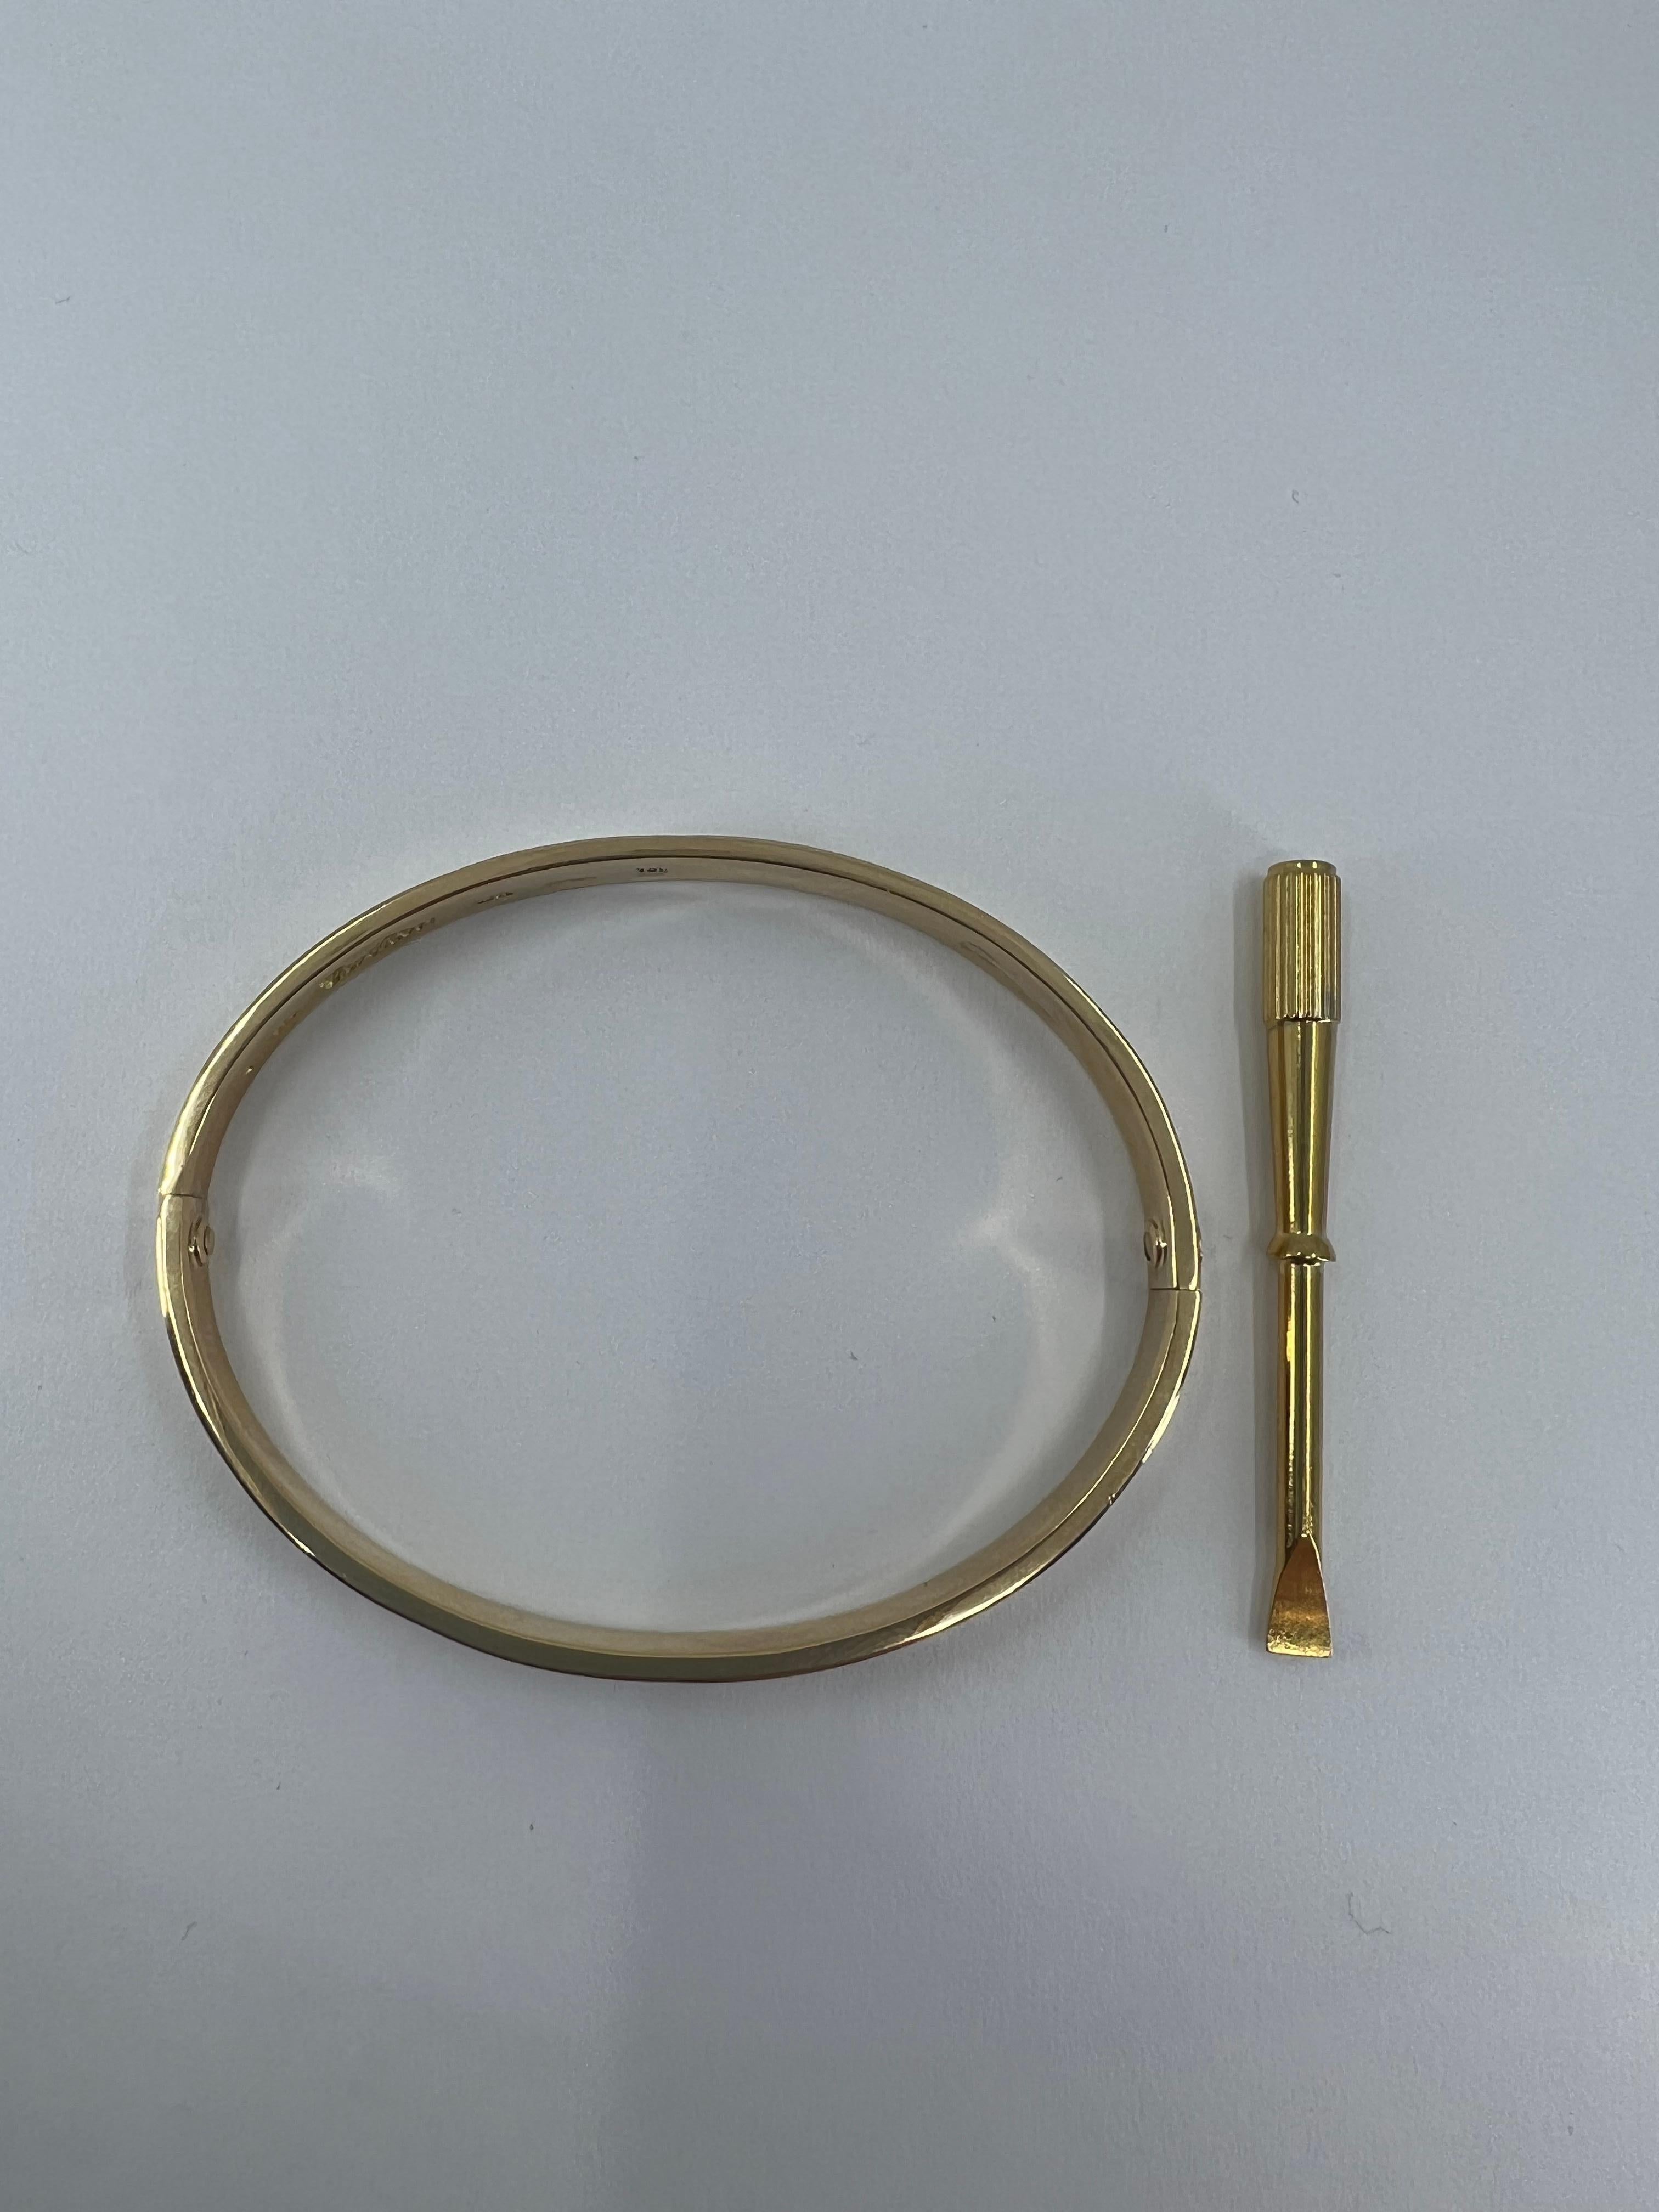 Cartier Vintage 1970 Love Bracelet In Excellent Condition For Sale In Beverly Hills, CA